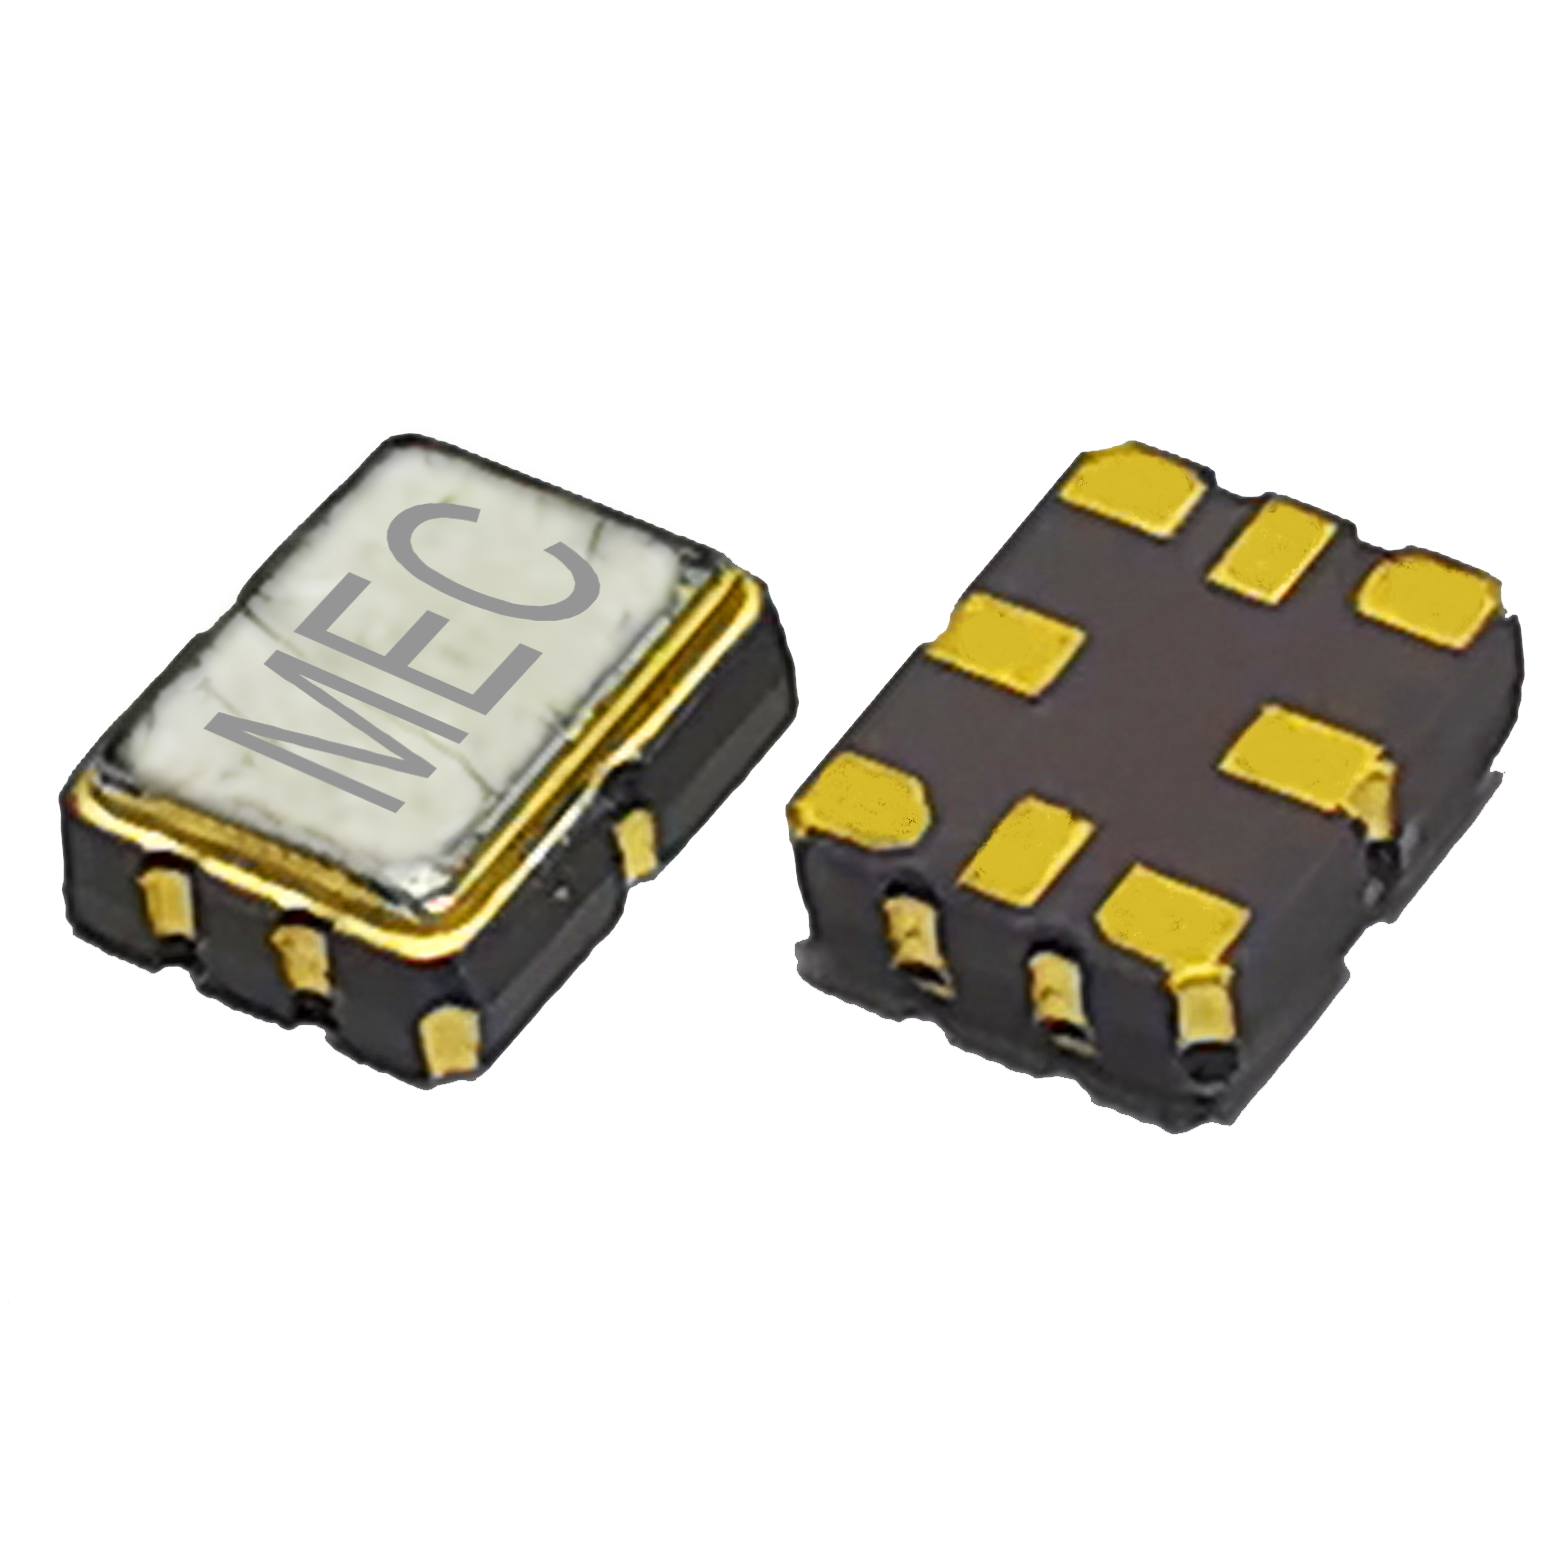 HQJF328 3225 1.8V Ultra Low Jitter Quick-turn Programmable Differential CML SMD Crystal Oscillator